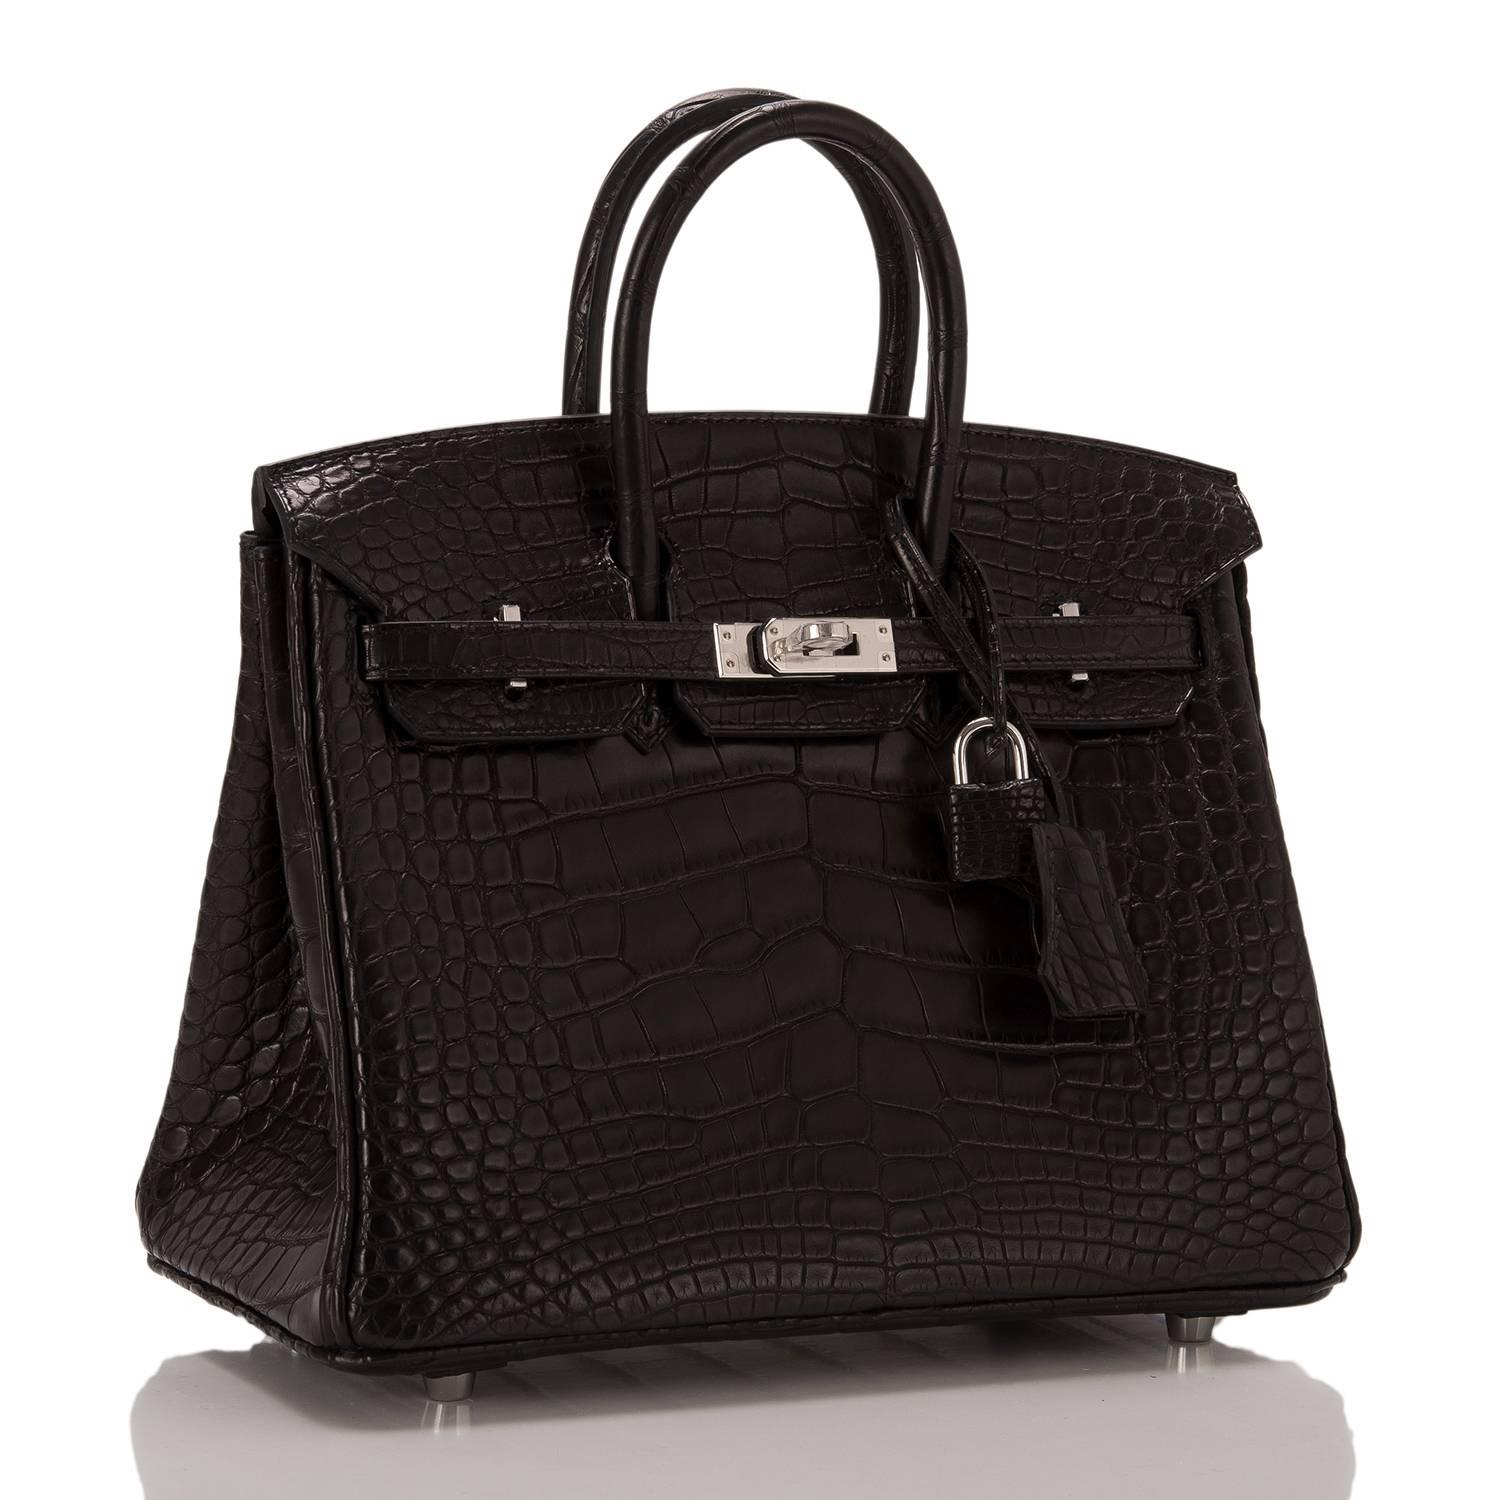 Hermes Black Birkin 25cm in matte alligator with palladium hardware.

This style features tonal stitching, front toggle closure, clochette with lock and two keys, and double rolled handles.

The interior is lined in Black chevre with one zip